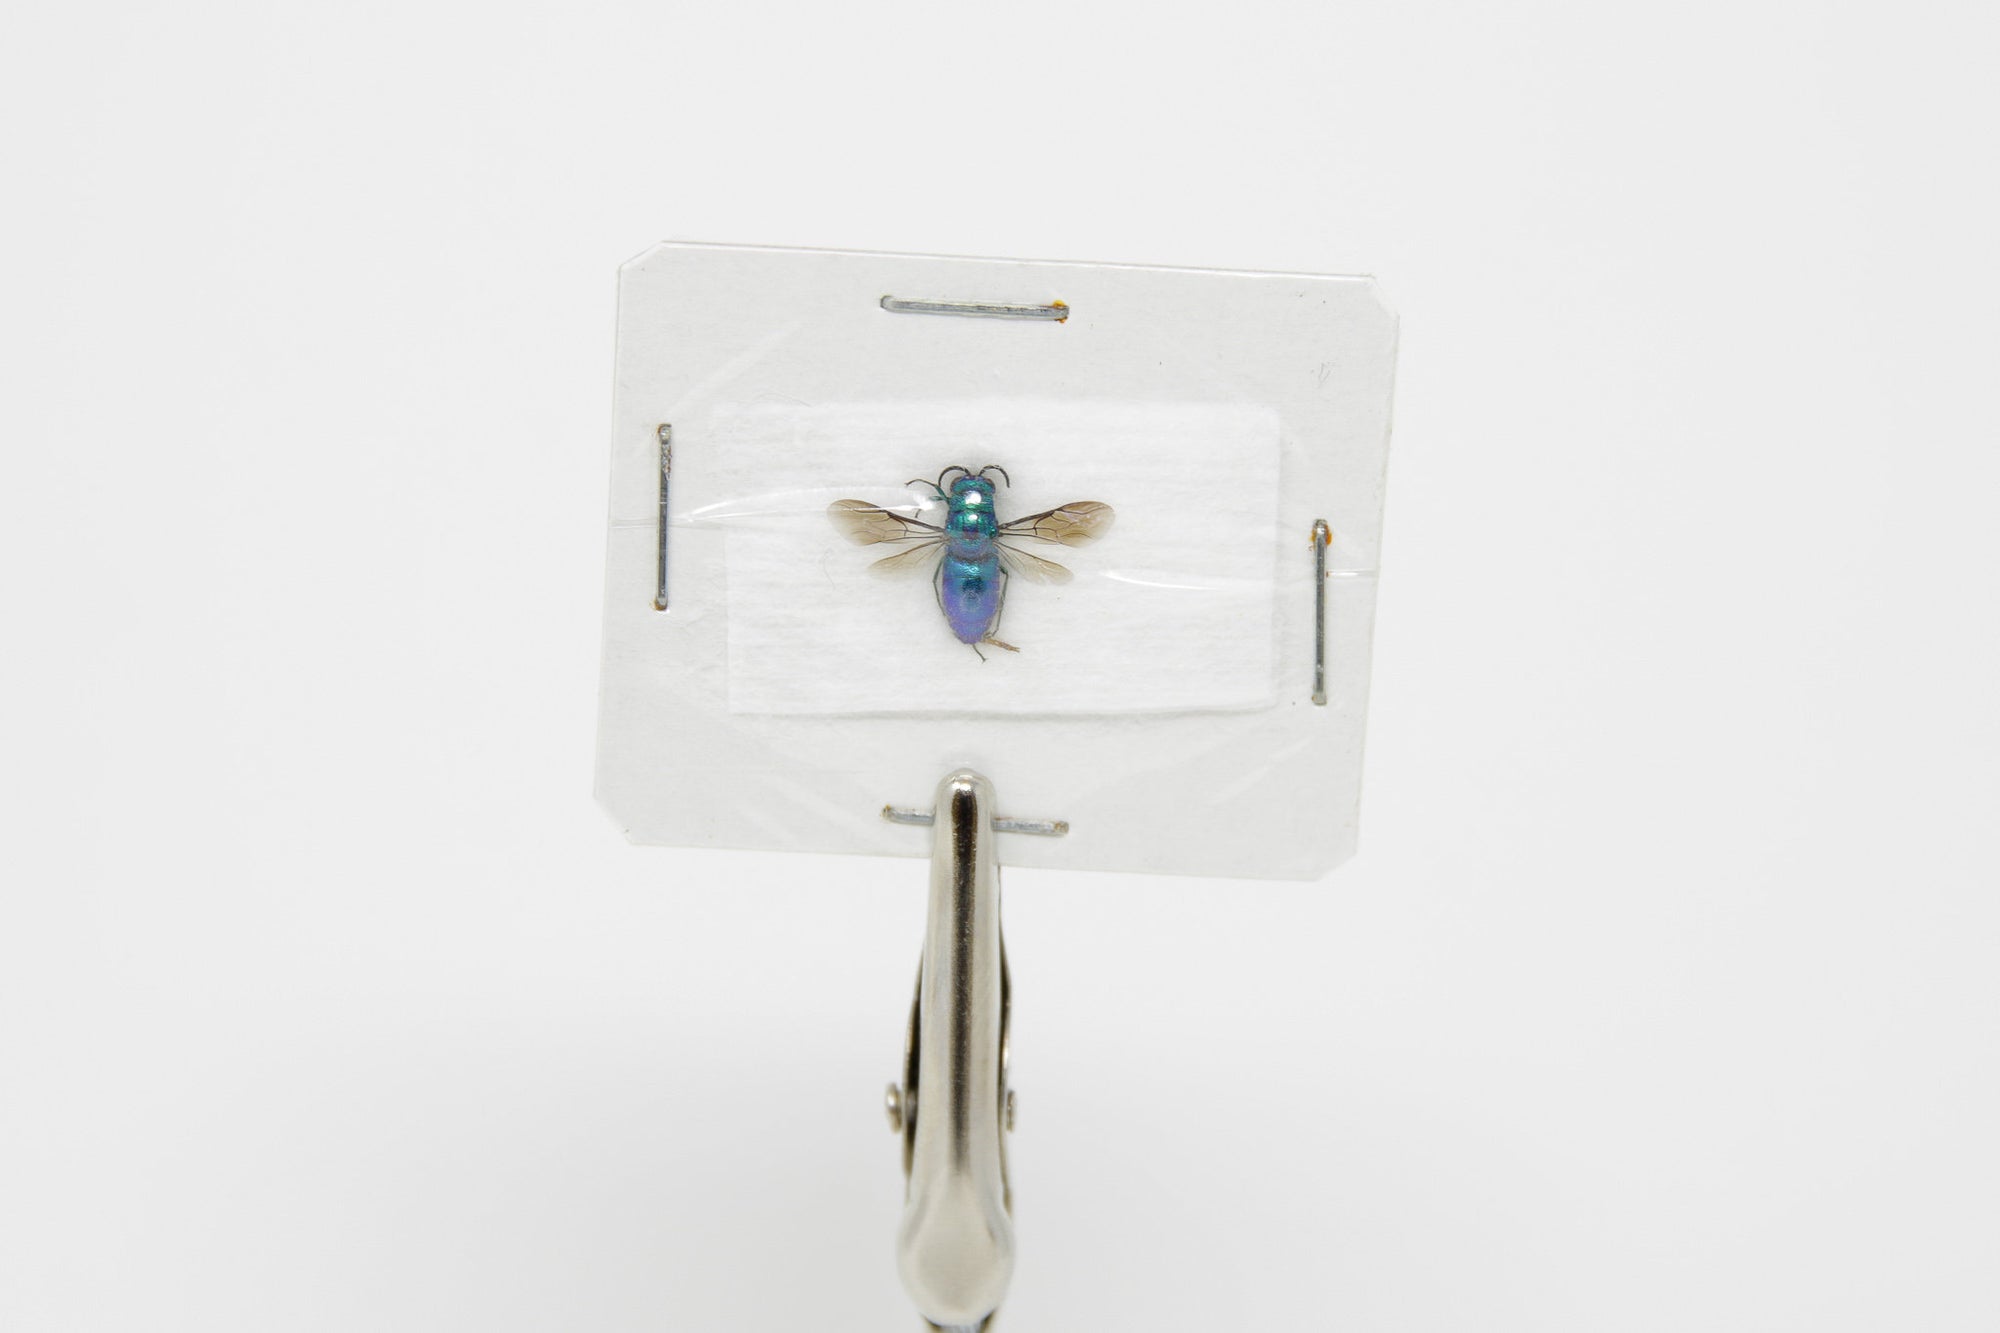 Euglossa dilemma | Green Orchid Bee | A2 Unmounted Specimen